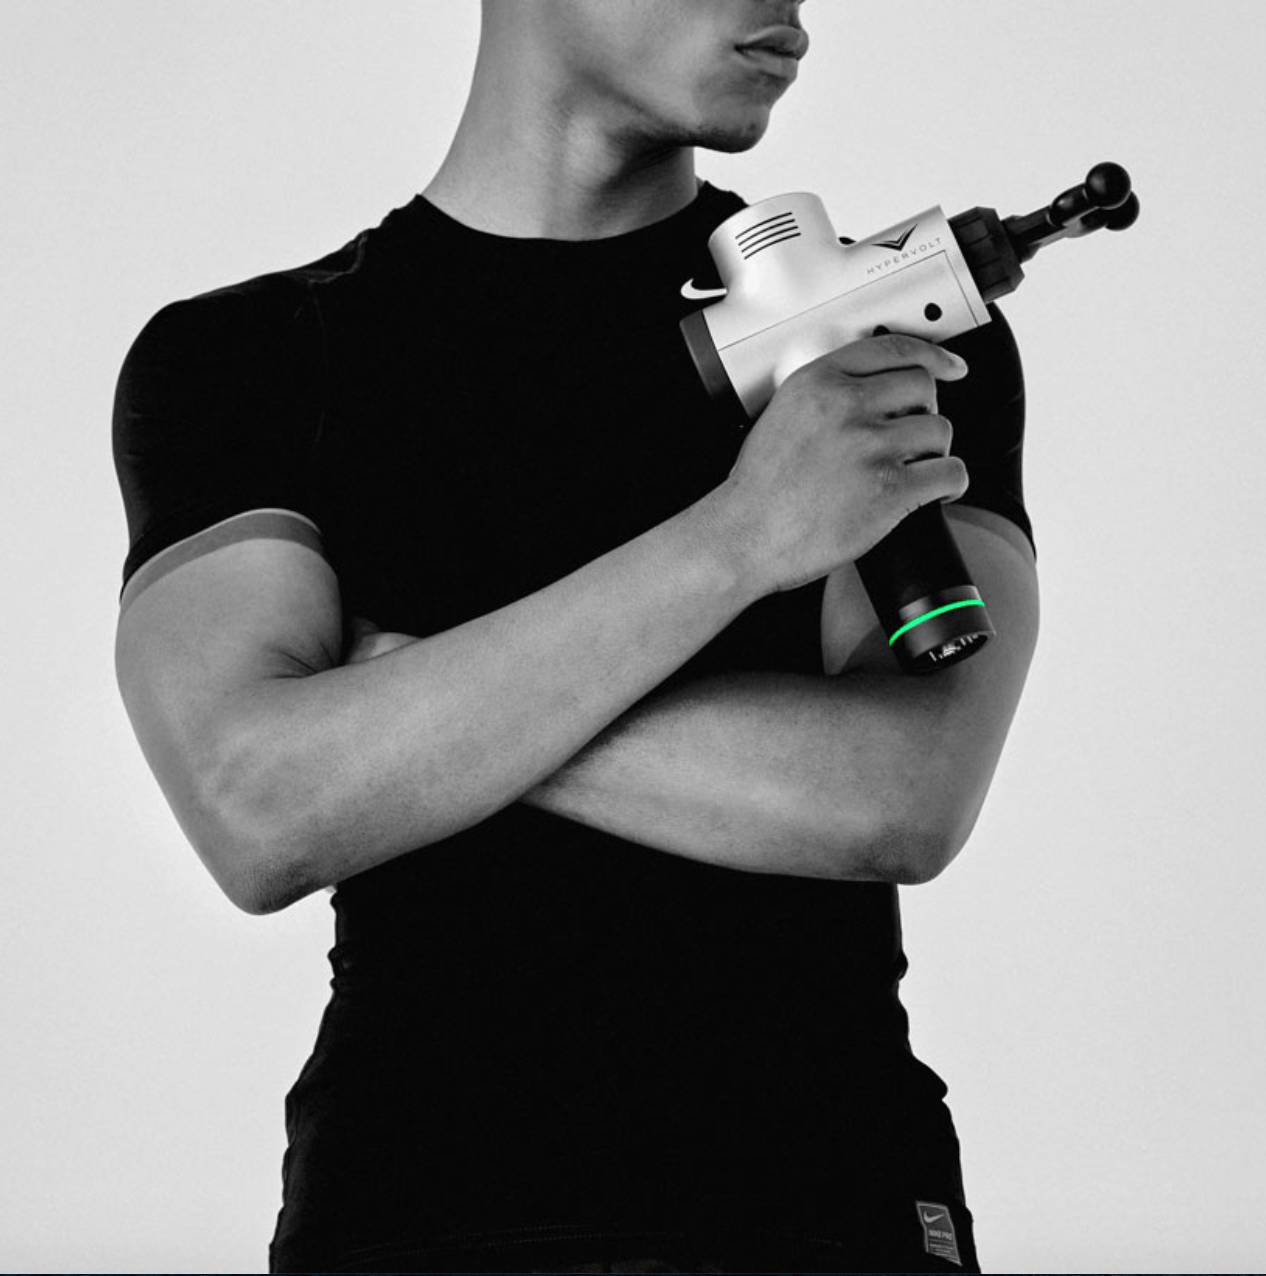 An athlete poses with a Hyperice device.